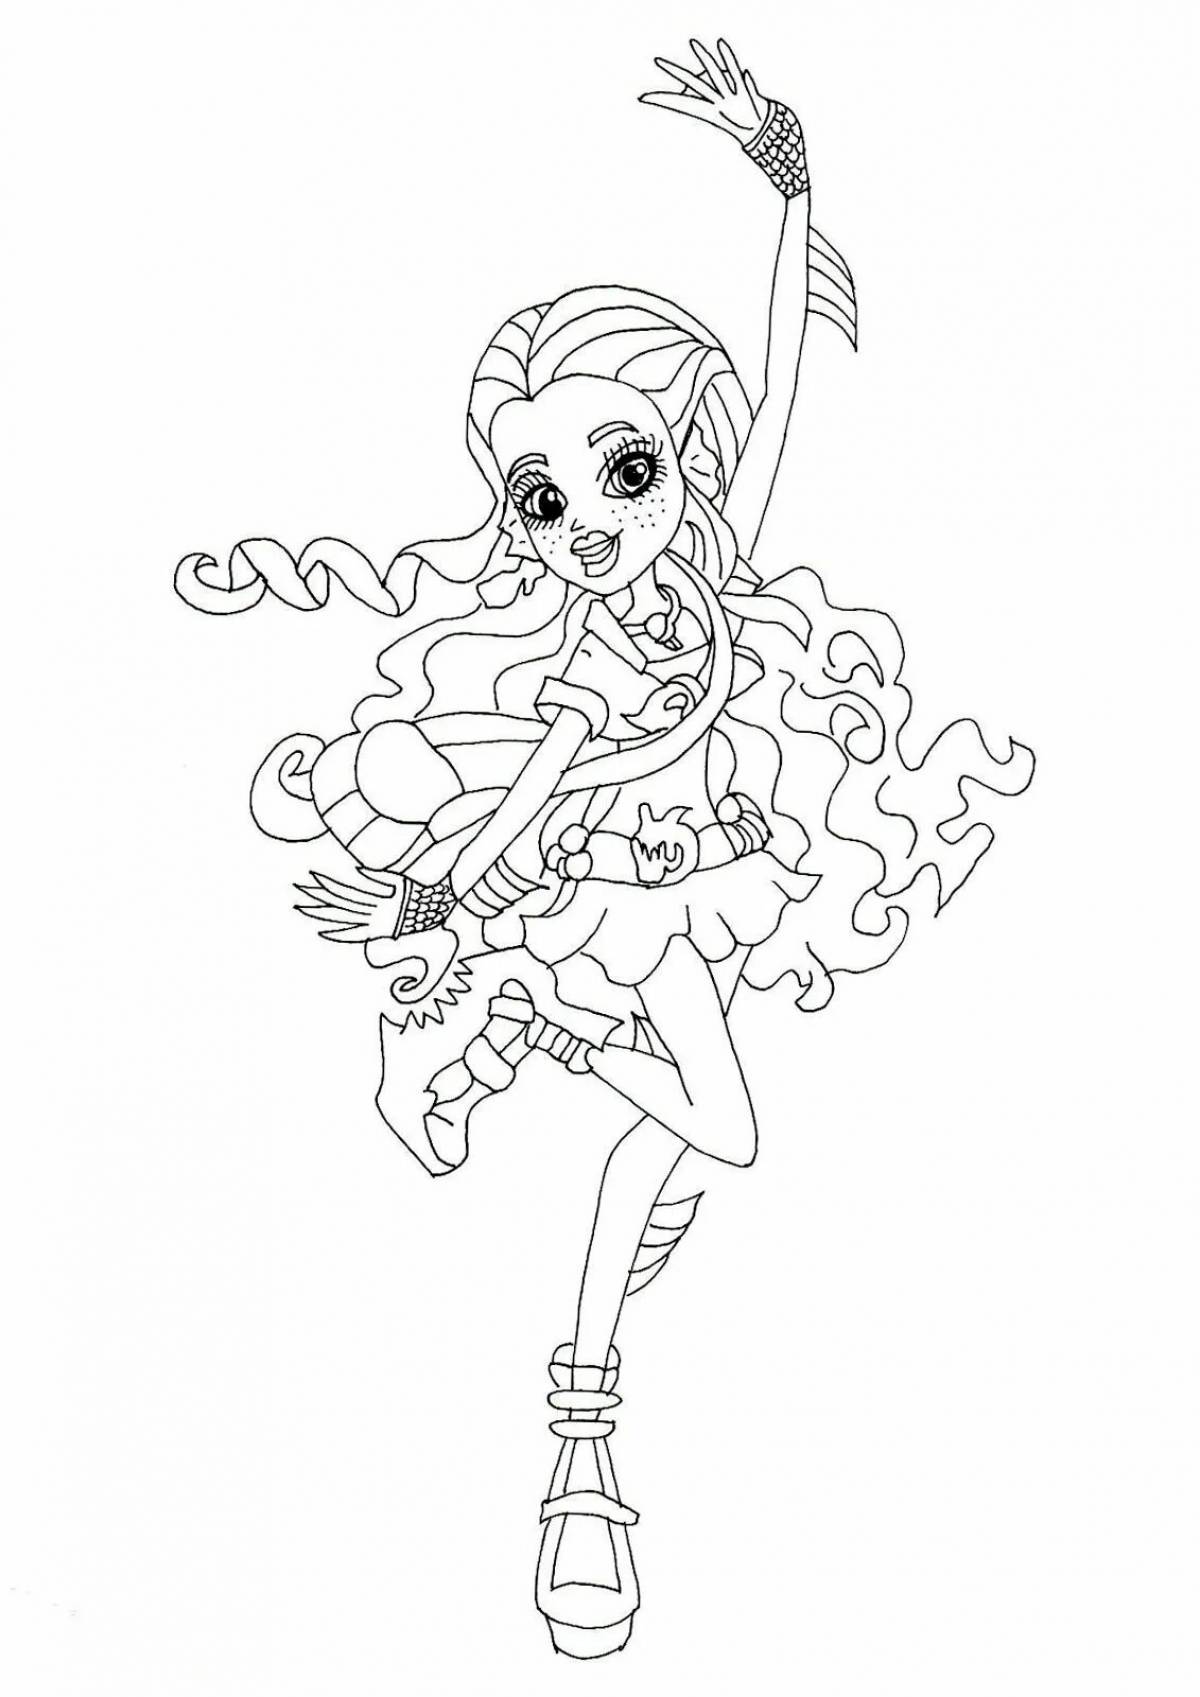 Gorgeous Cave Club doll coloring page